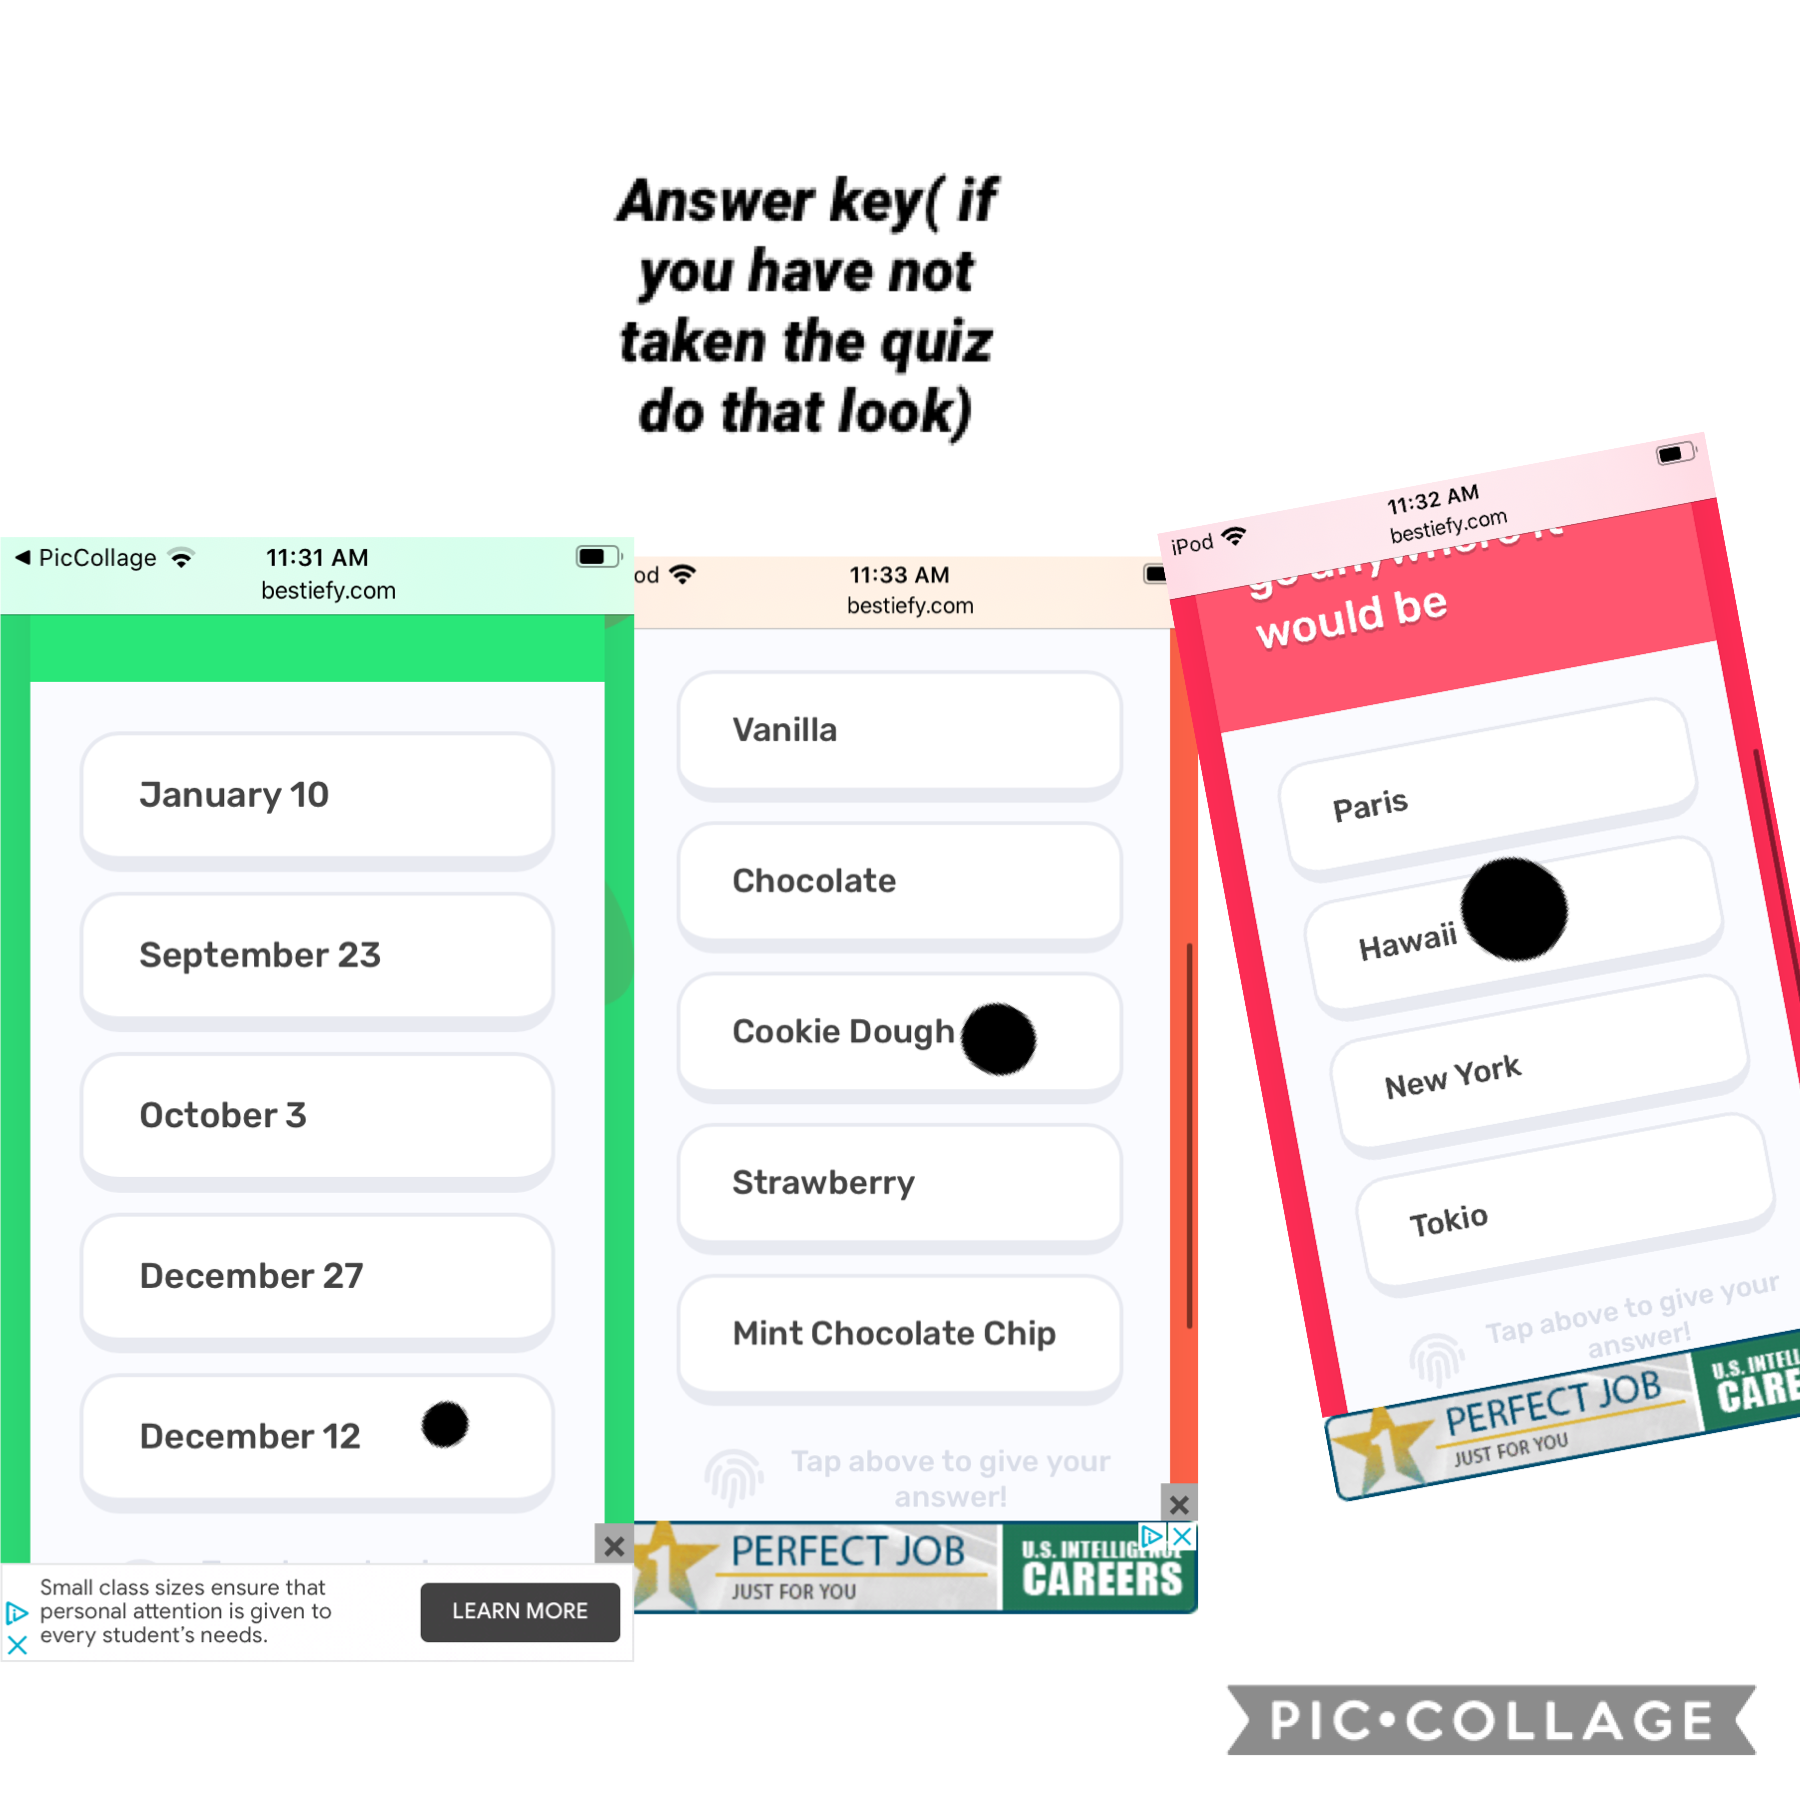 If you have not taken the quiz please do not look. If you have taken the quiz here are the first three questions in the little dots are on the answers.